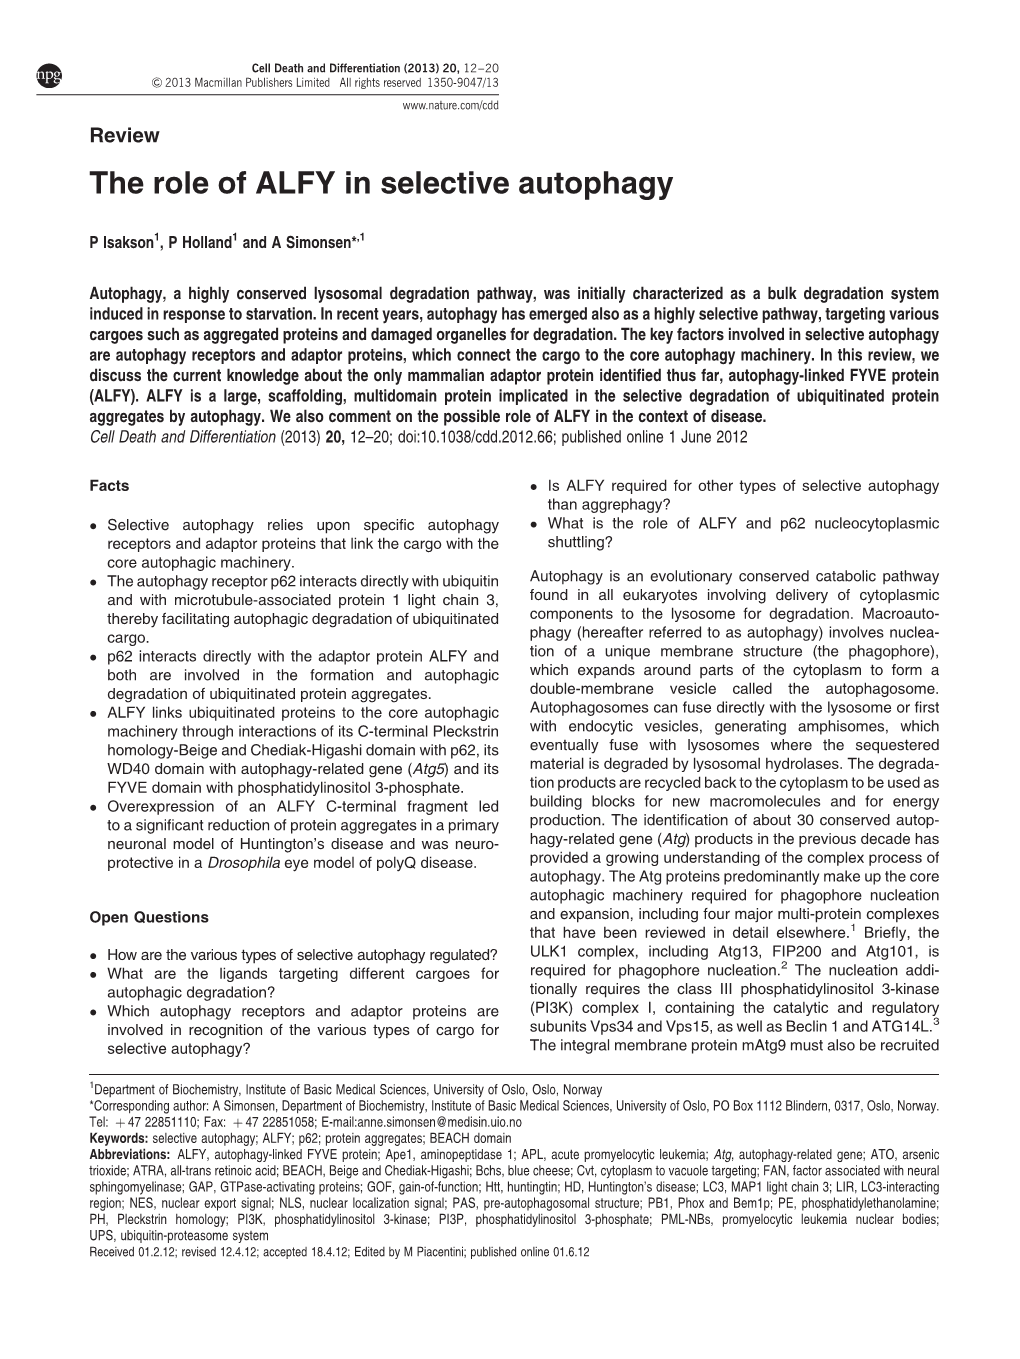 The Role of ALFY in Selective Autophagy